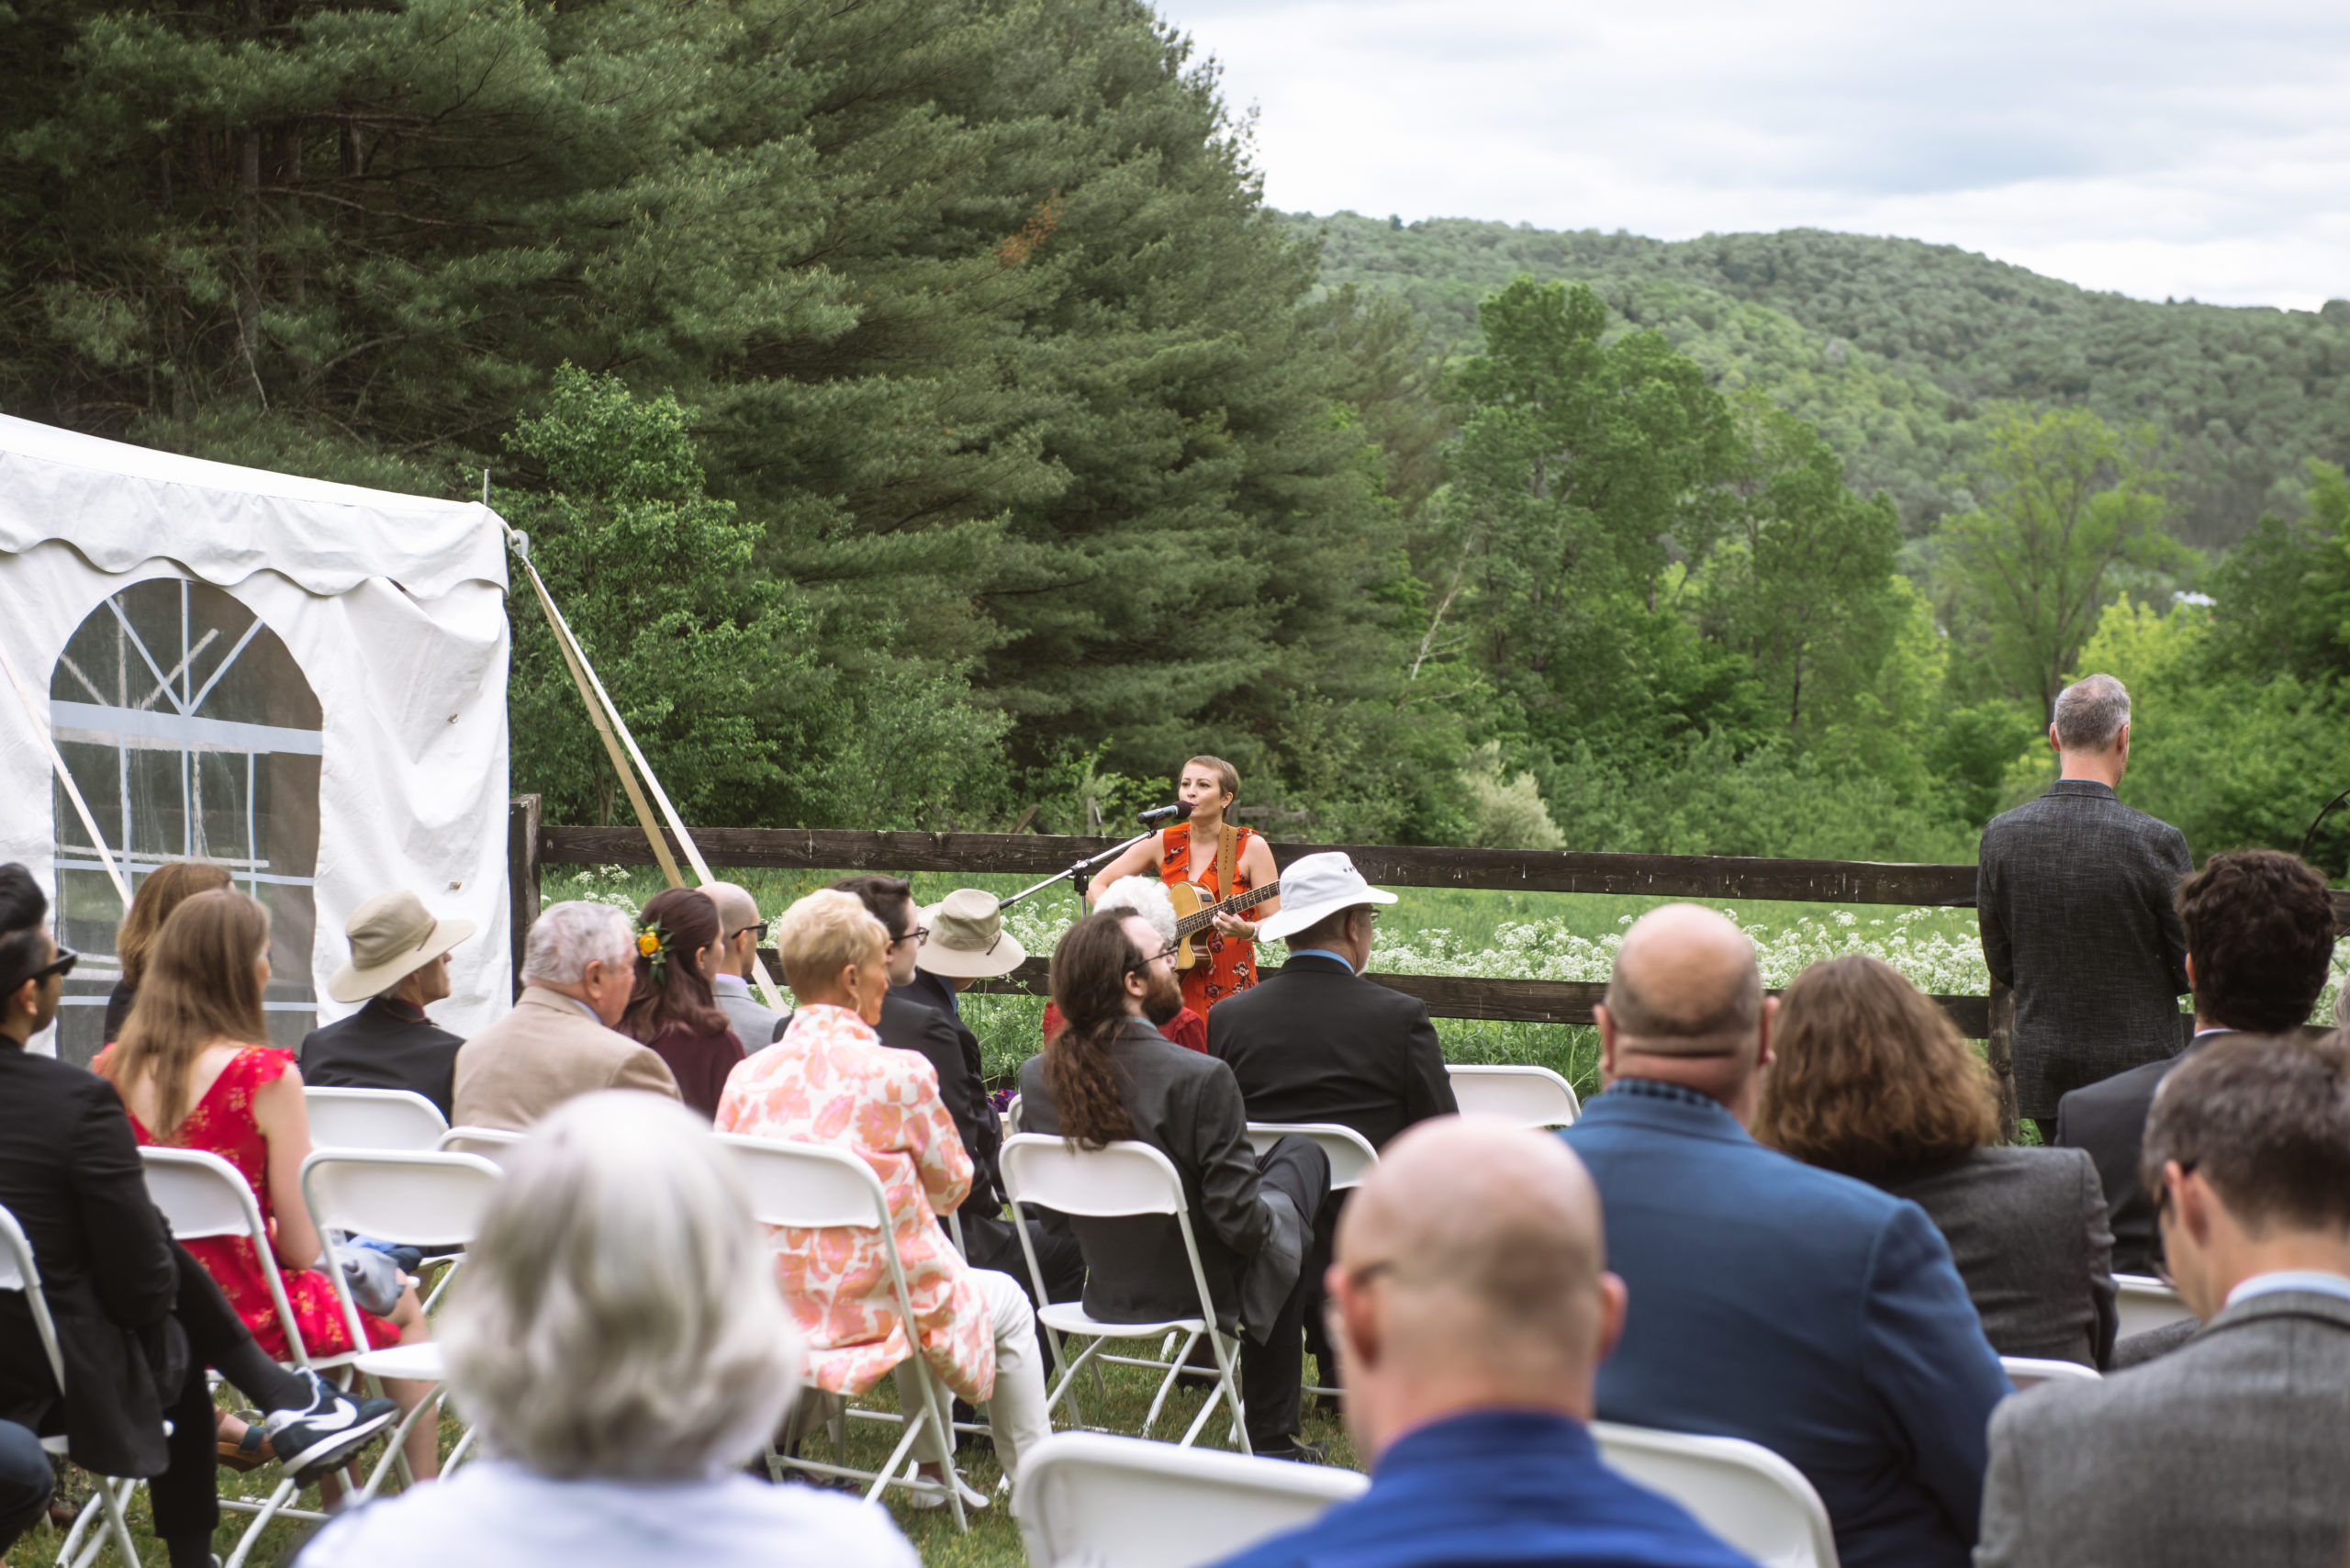 Friend of the couple singing and playing guitar during the ceremony. She is standing in front of a dark wooden fence and there are seated guests in the foreground.